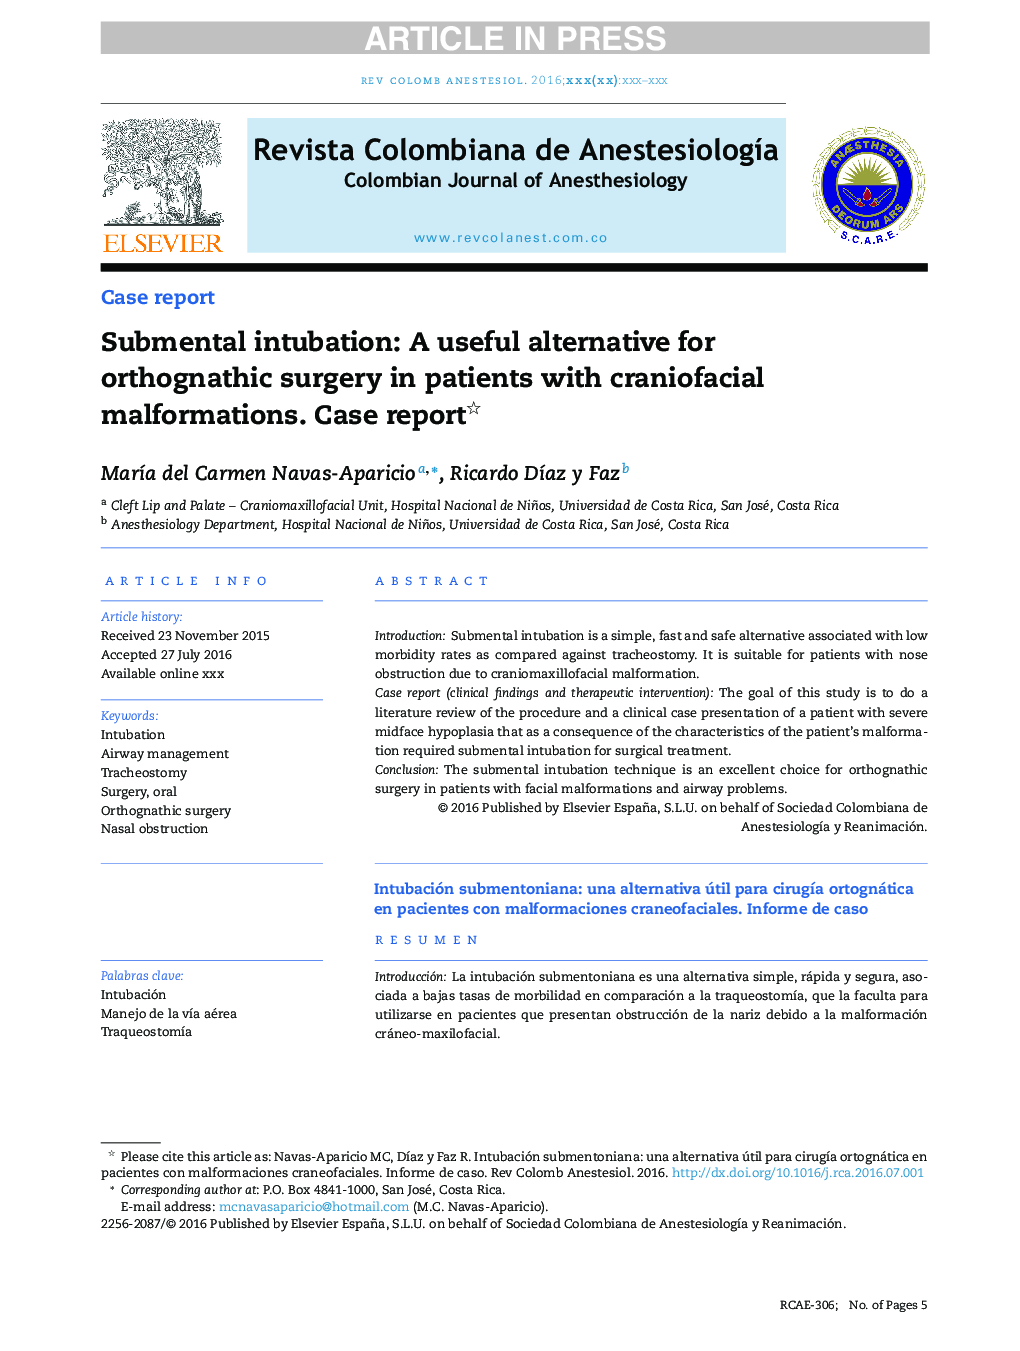 Submental intubation: A useful alternative for orthognathic surgery in patients with craniofacial malformations. Case report